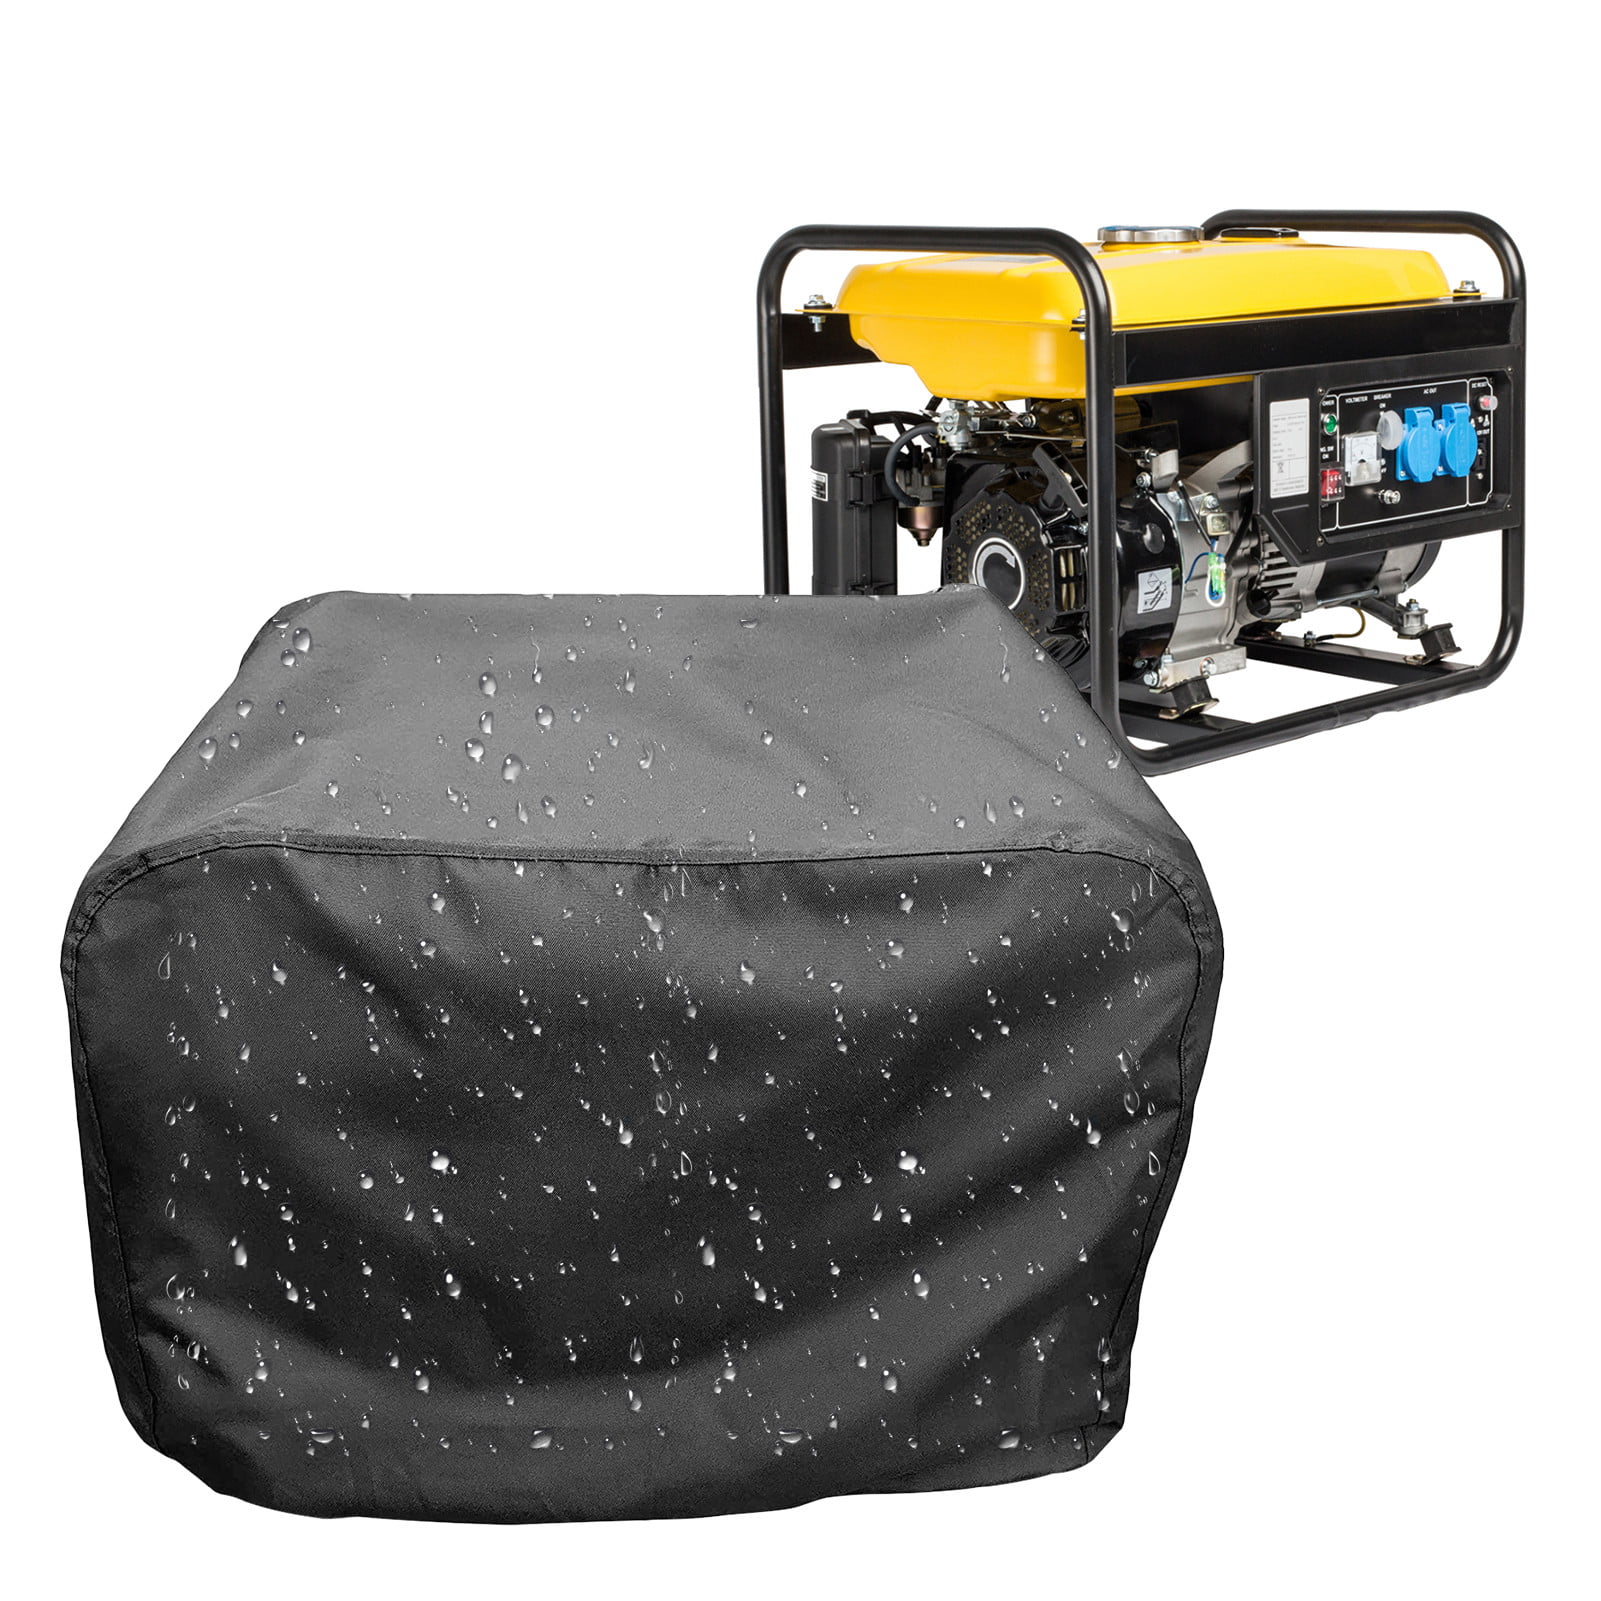 Heavy Duty Thicken 210D Polyester Weather/UV Resistant Generator Cover for Universal Portable Generators Grill Covers ZARUP Generator Cover Waterproof 26x20.1x20.1in 